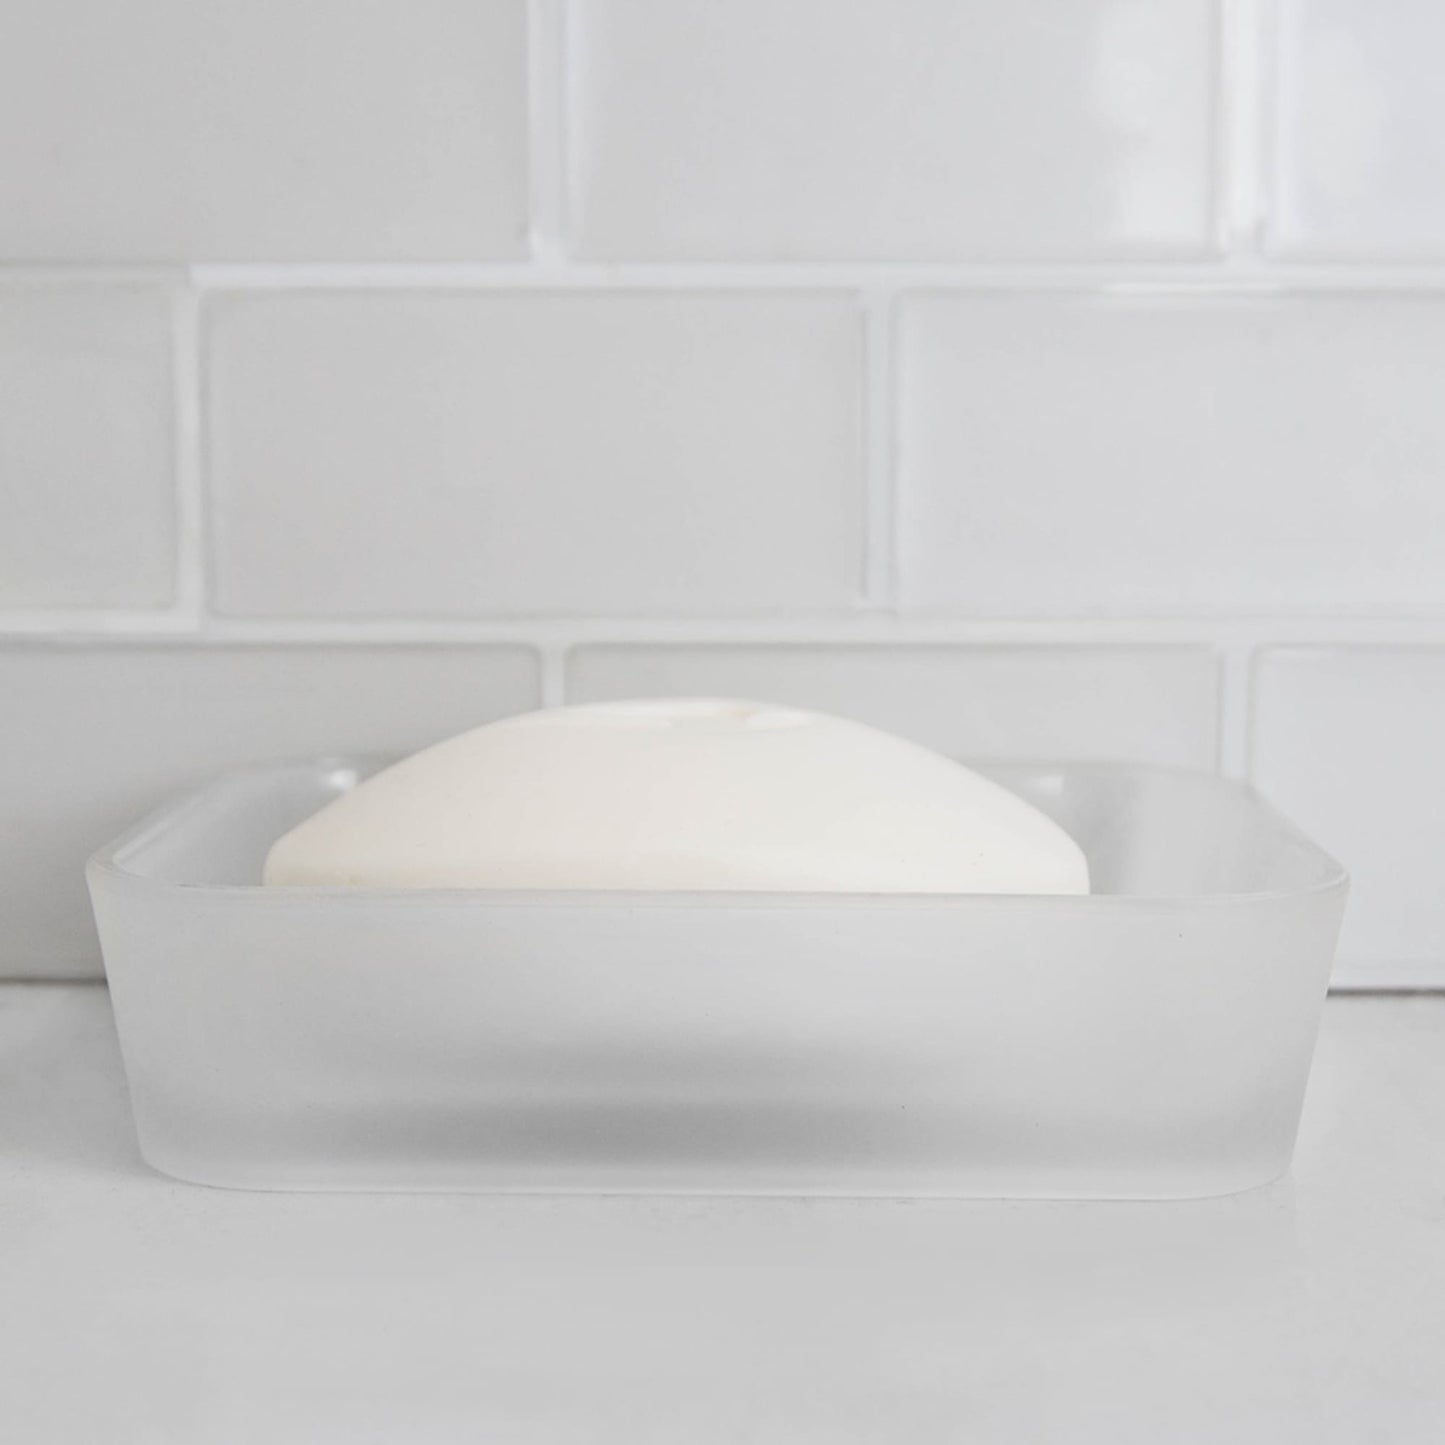 Frosted Rubberized Plastic Soap Dish